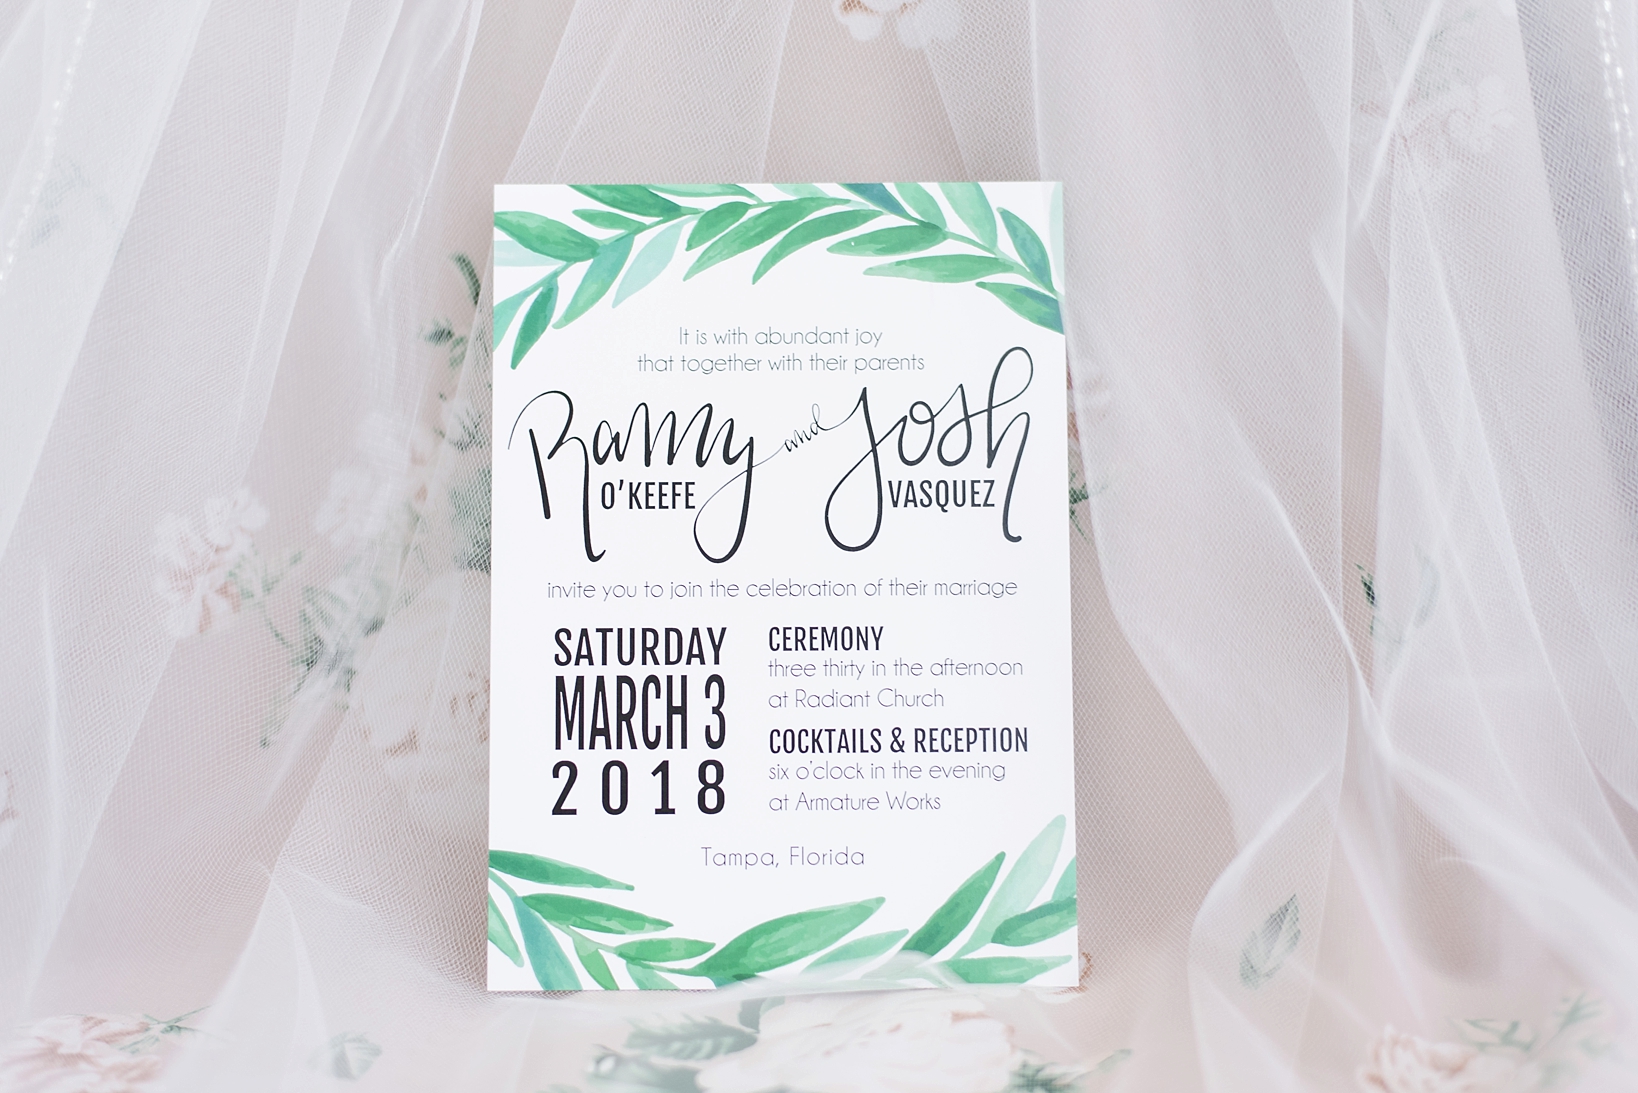 Wedding invitation with fern accents against a floral tulle skirt